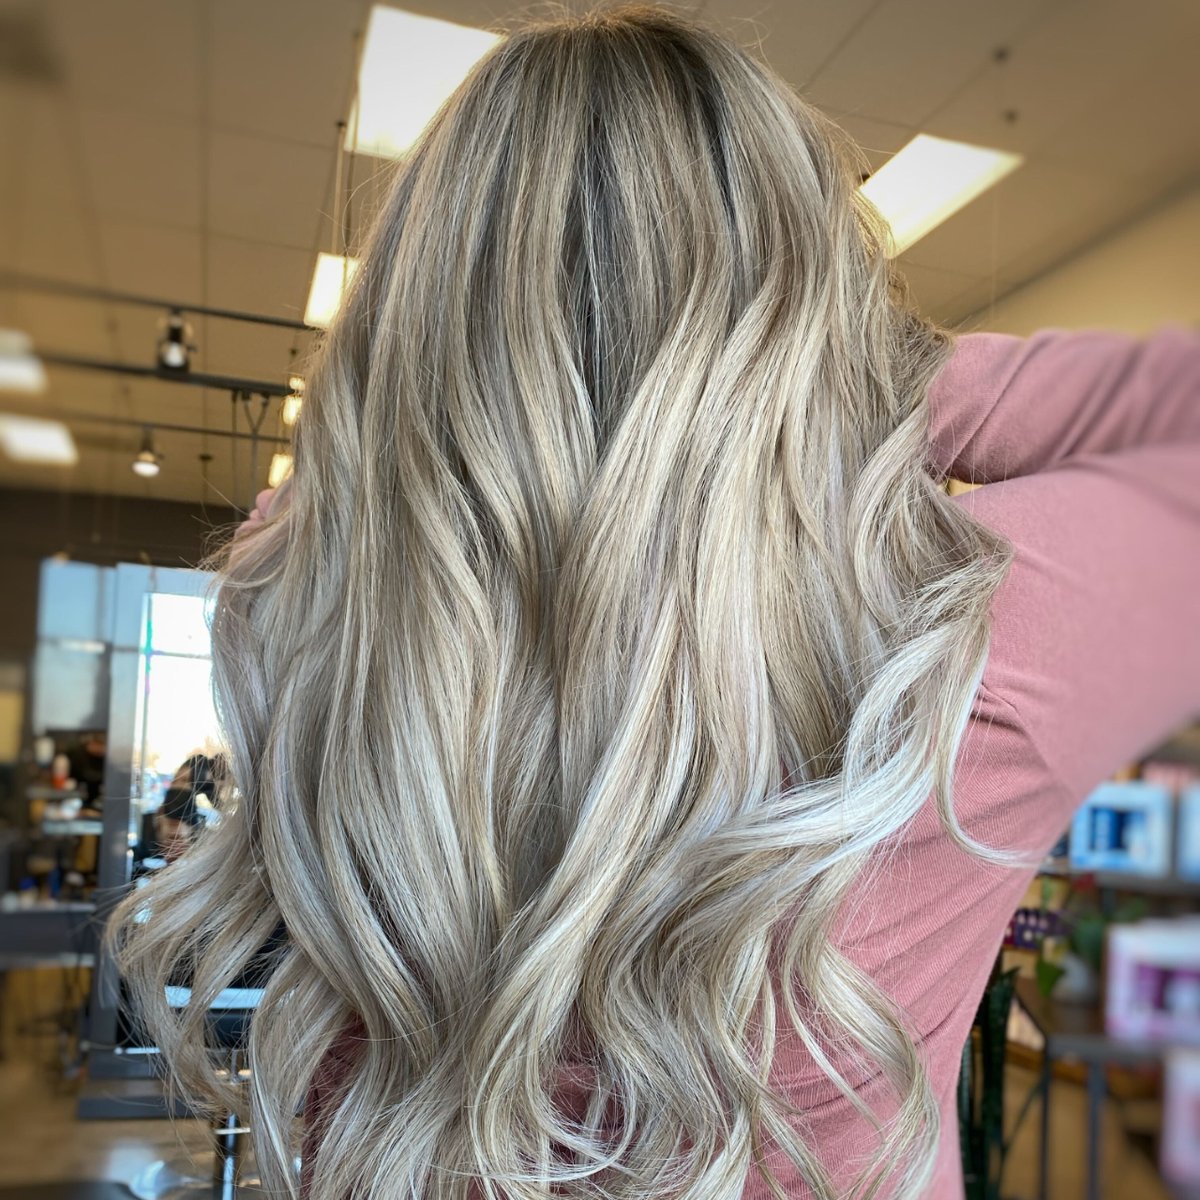 Empowered and beautiful 💋 LOVE this new look curated by our stylist Ashley in our Canton location! 
.
.
.#baltimorehairstylist  #baltimoreravens  #baltimorehair  #baltimorestylist  #baltimoreeats  #madeinbaltimore  #balayage